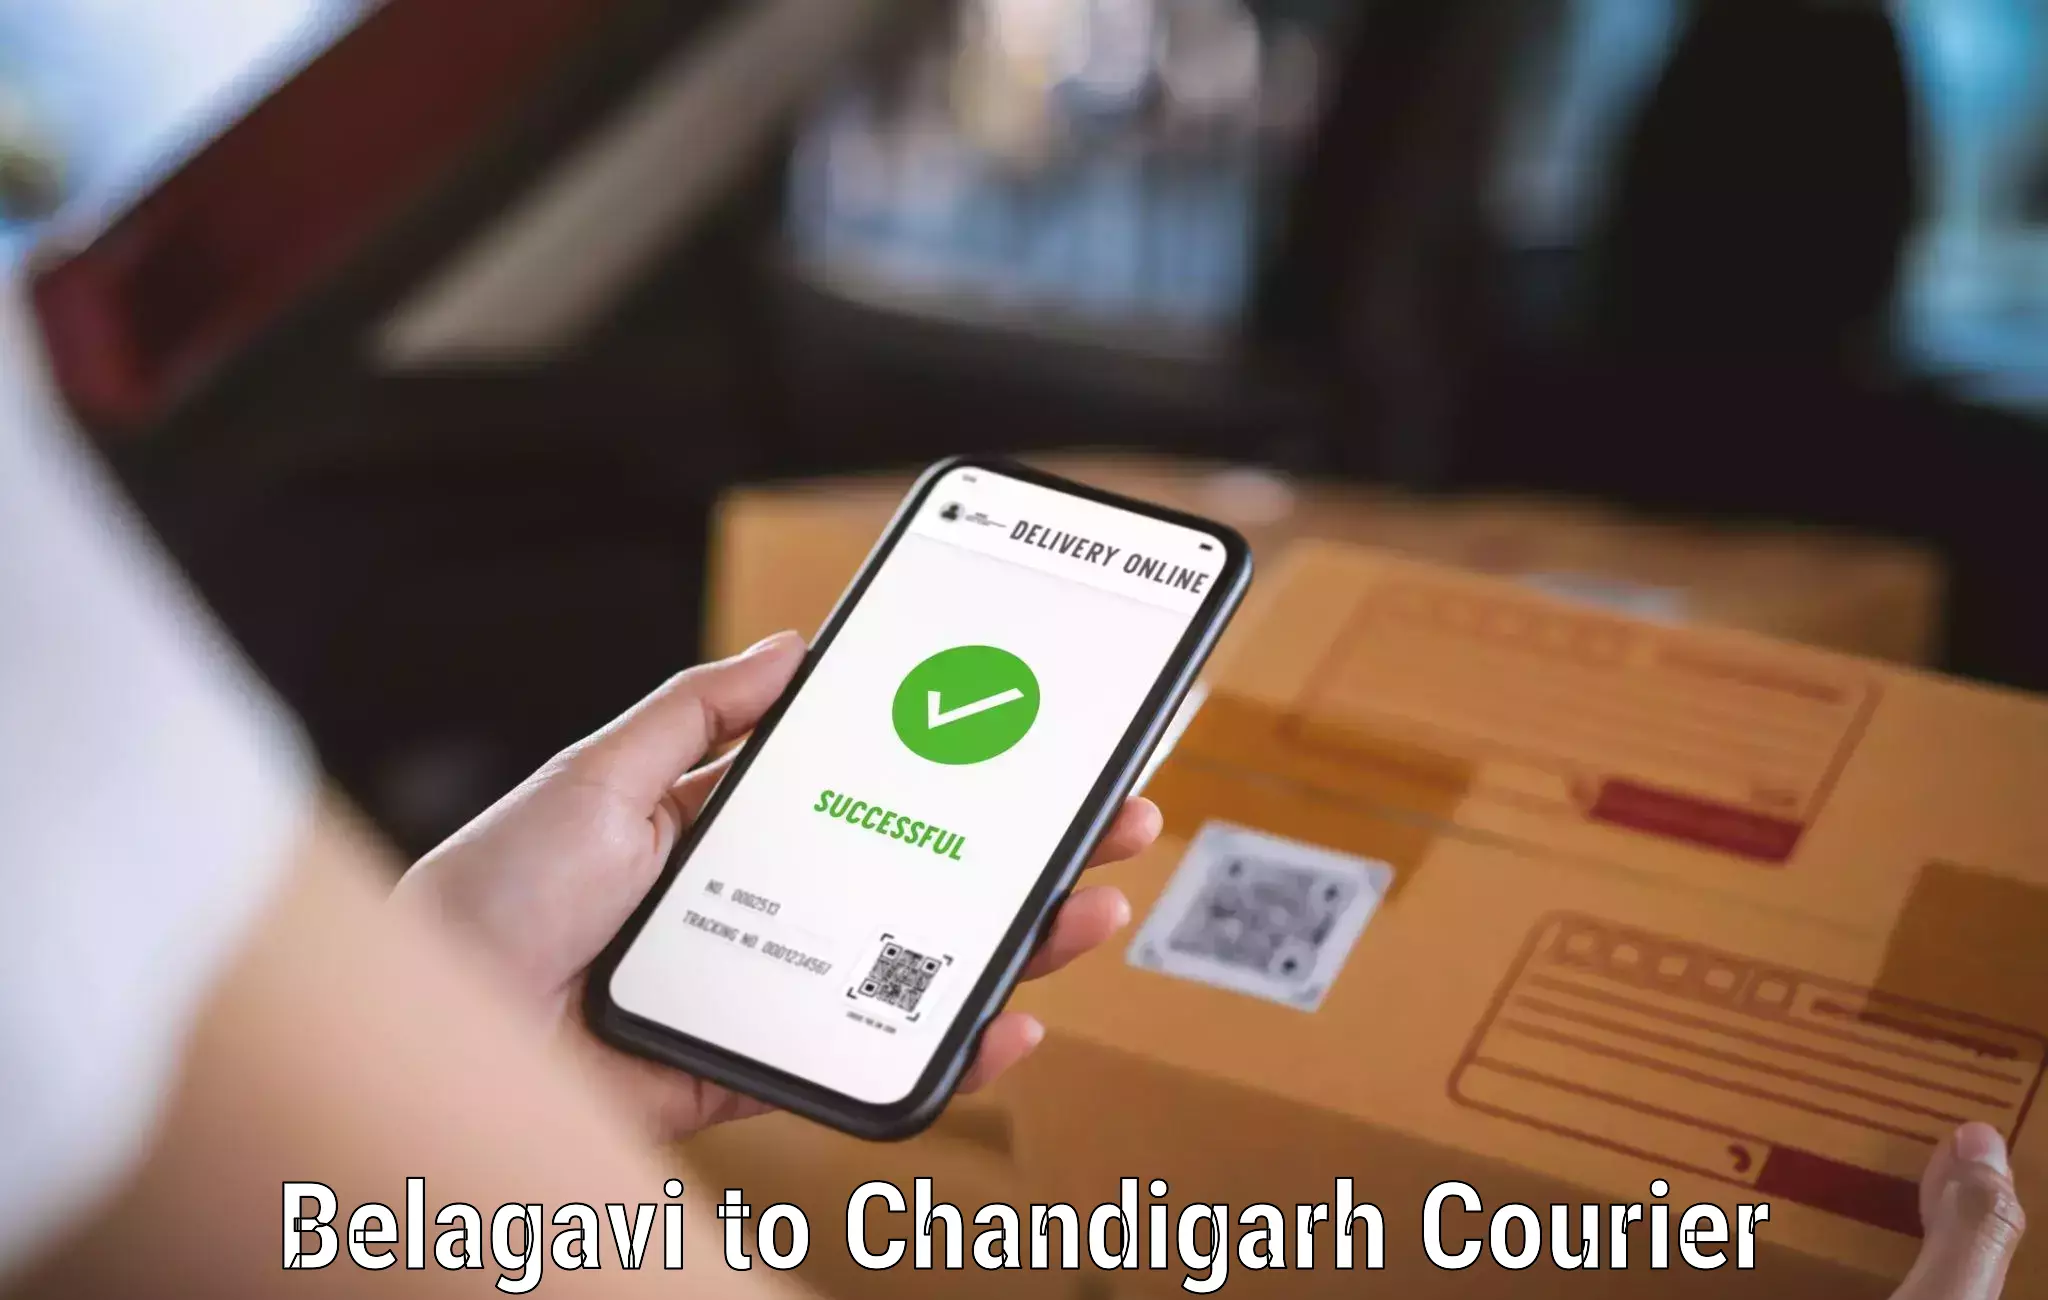 Courier service booking Belagavi to Chandigarh